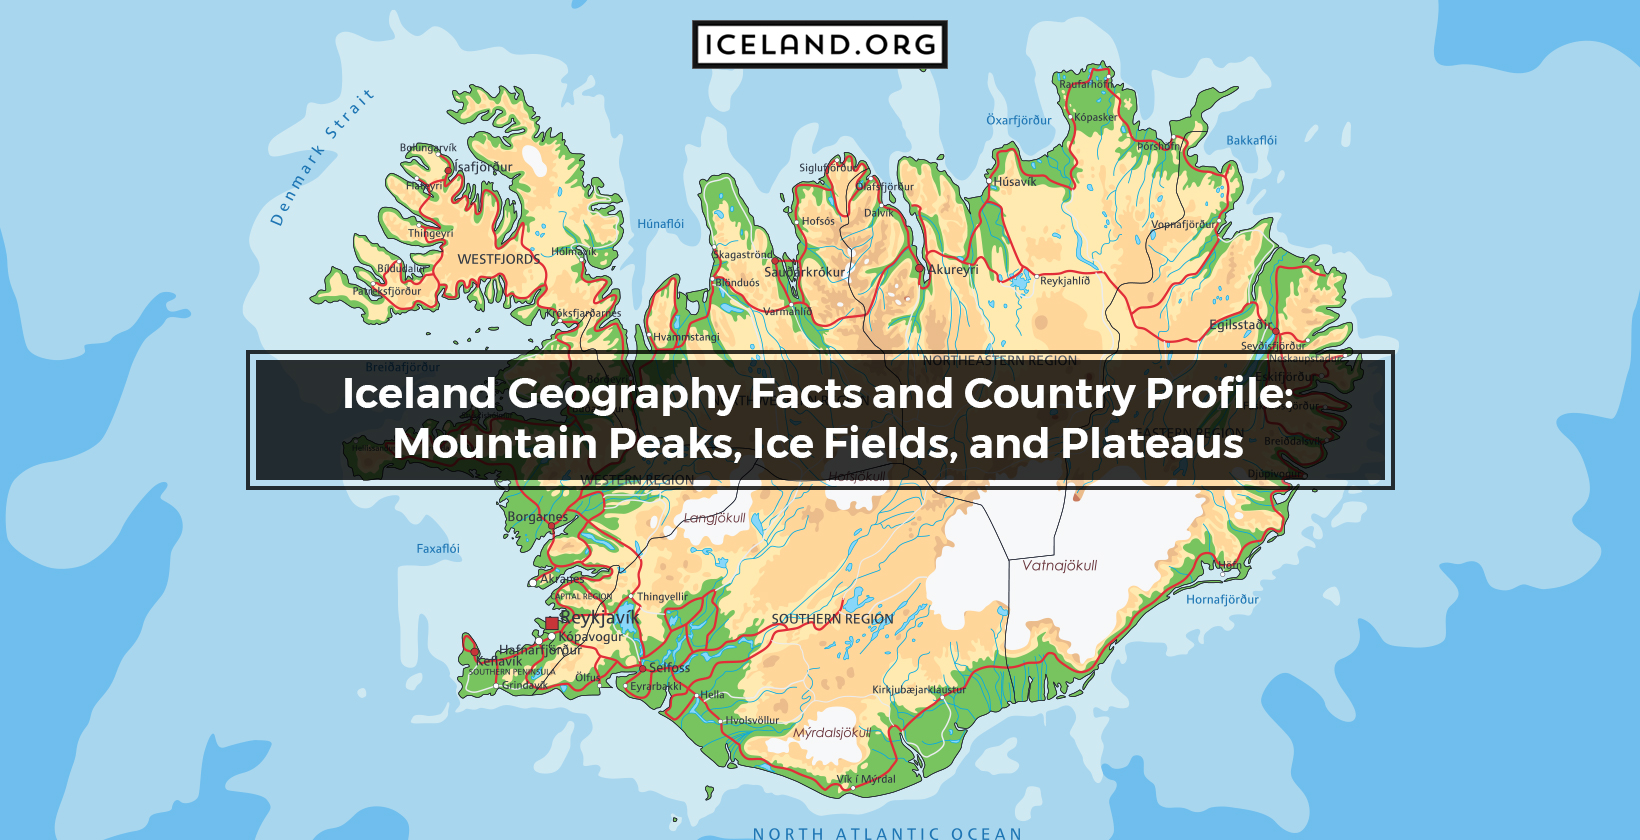 Iceland Geography Facts and Country Profile